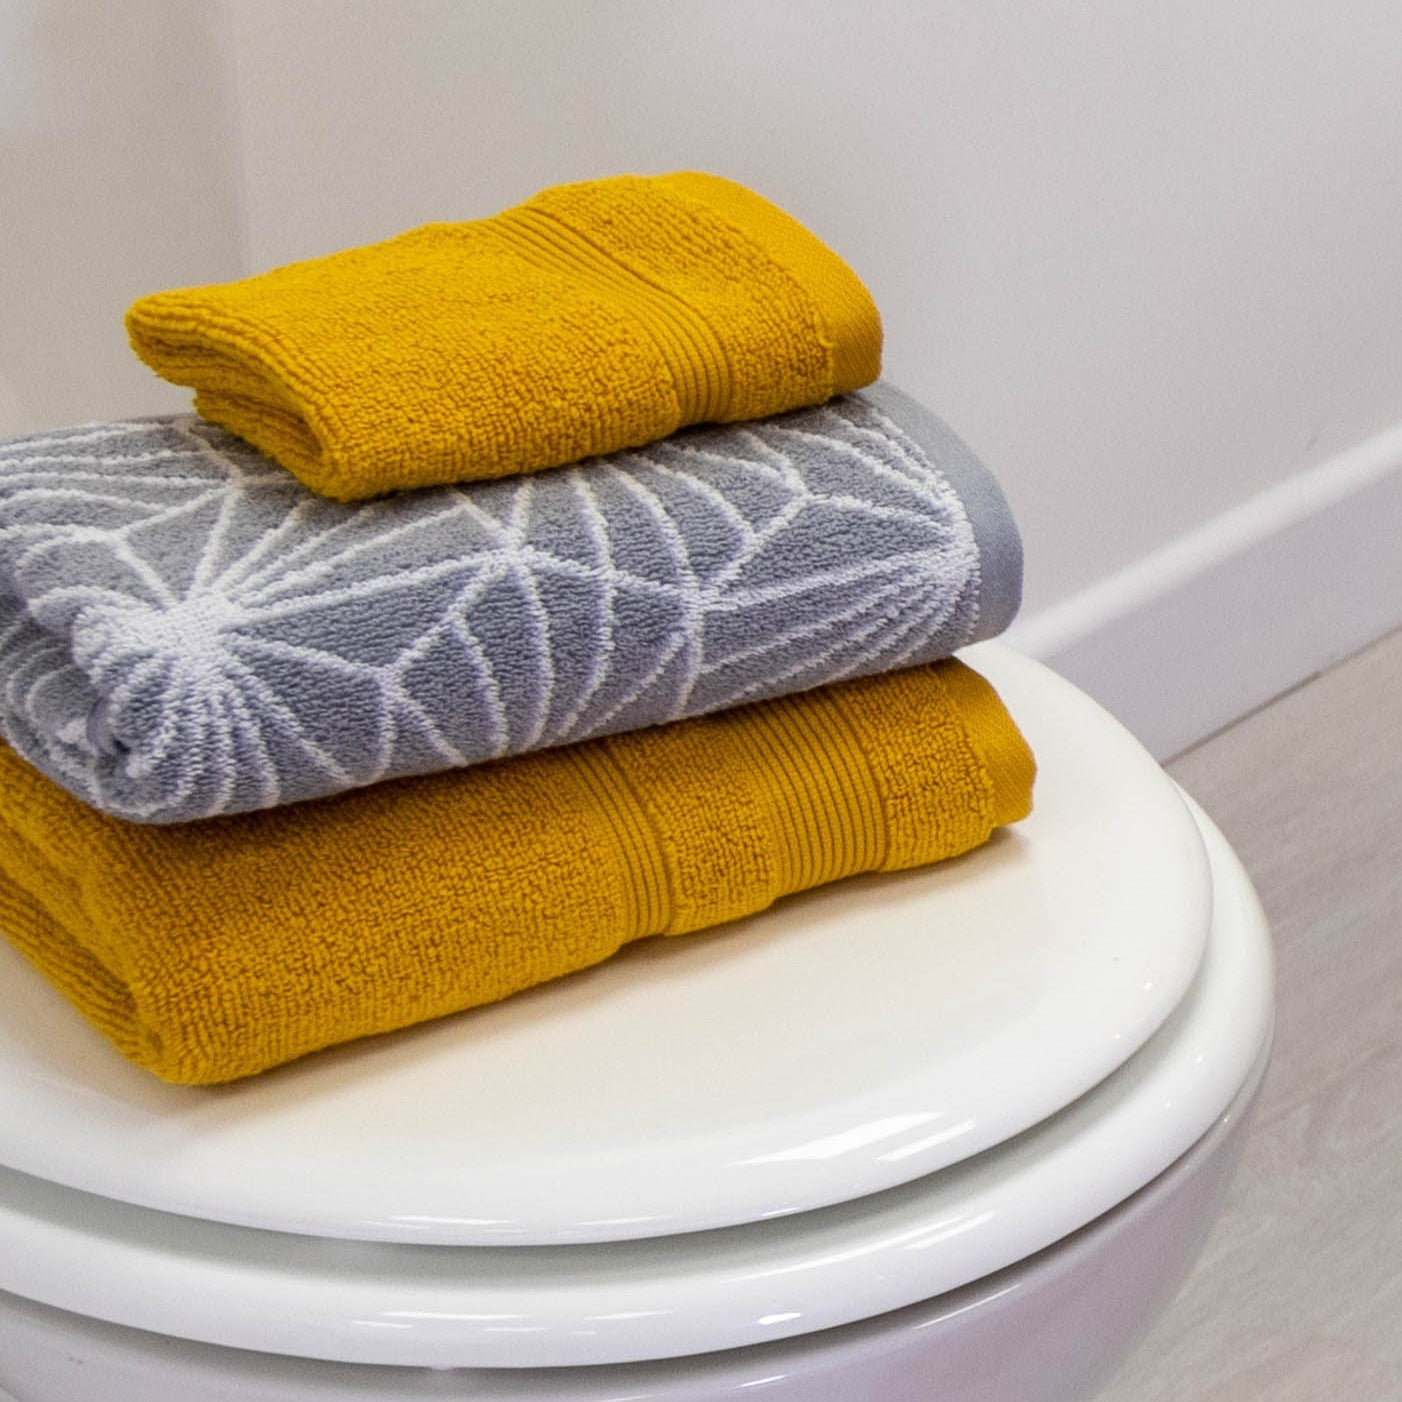 Oasis Towels: The Importance of Using Towel Warmers